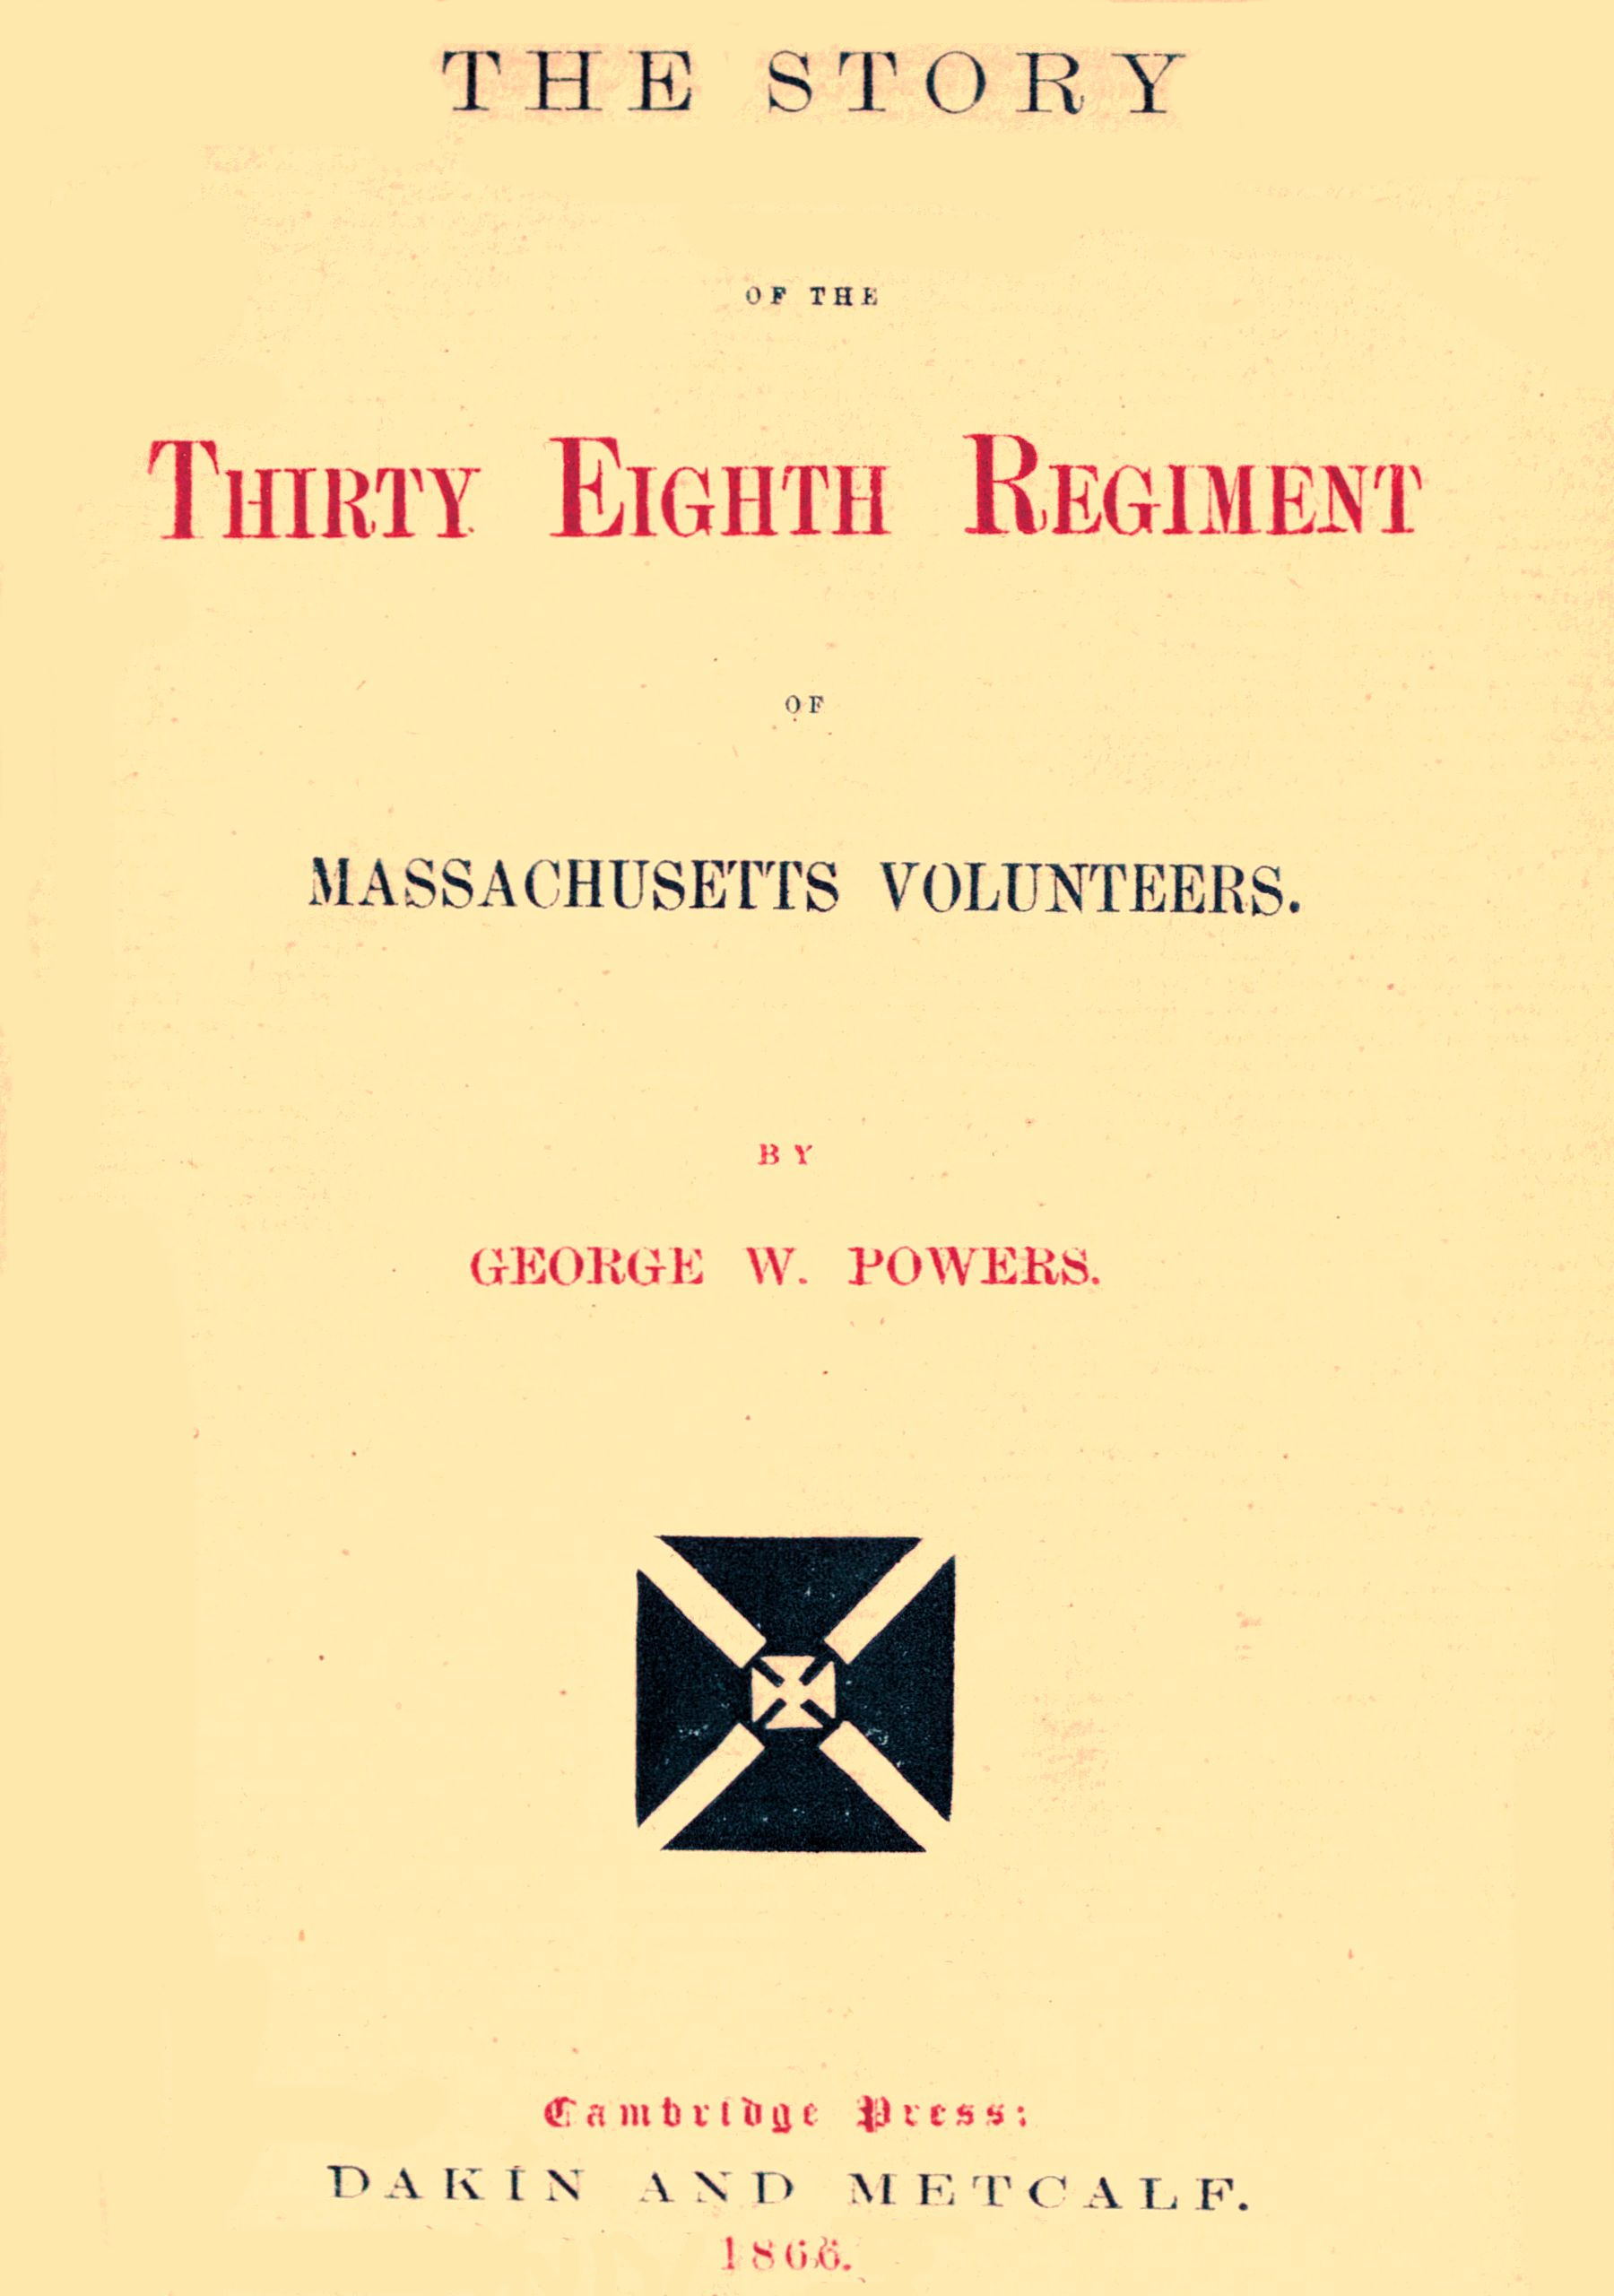 The story of the Thirty Eighth regiment of Massachusetts volunteers